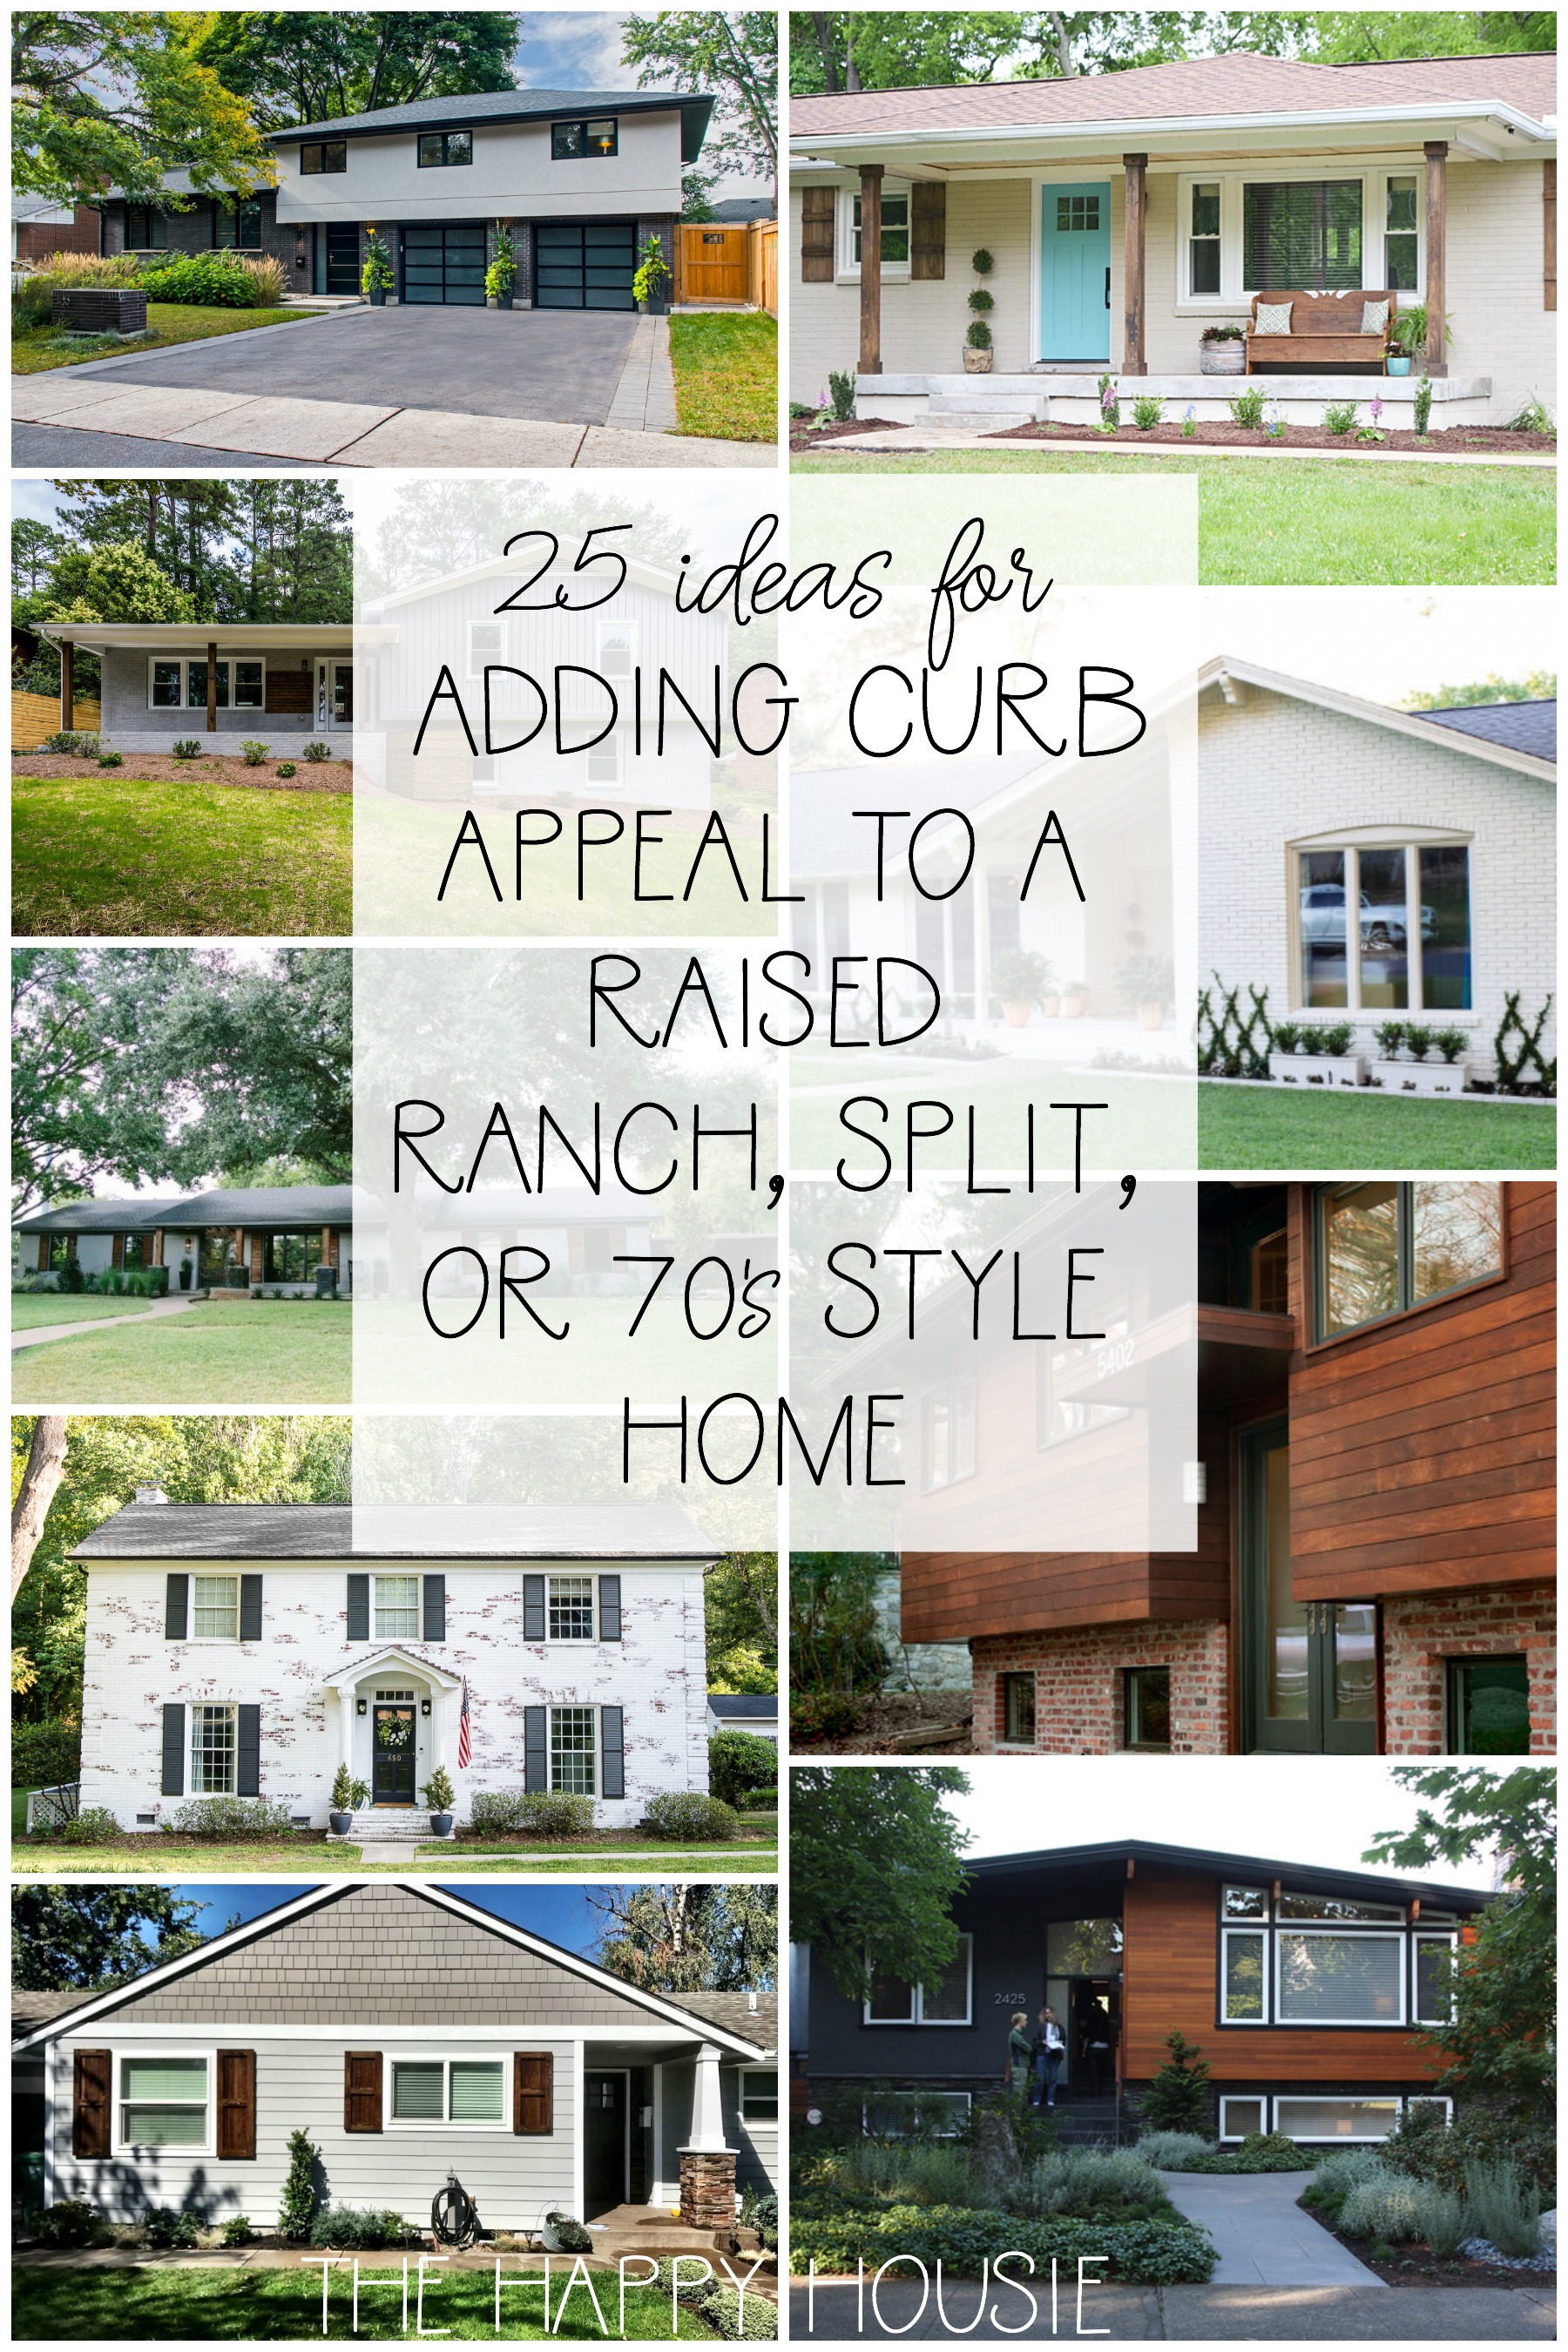 https://www.thehappyhousie.com/wp-content/uploads/2019/06/25-idea-for-adding-curb-appeal-to-a-raised-ranch-split-level-or-seventies-70s-style-home-exterior.jpg